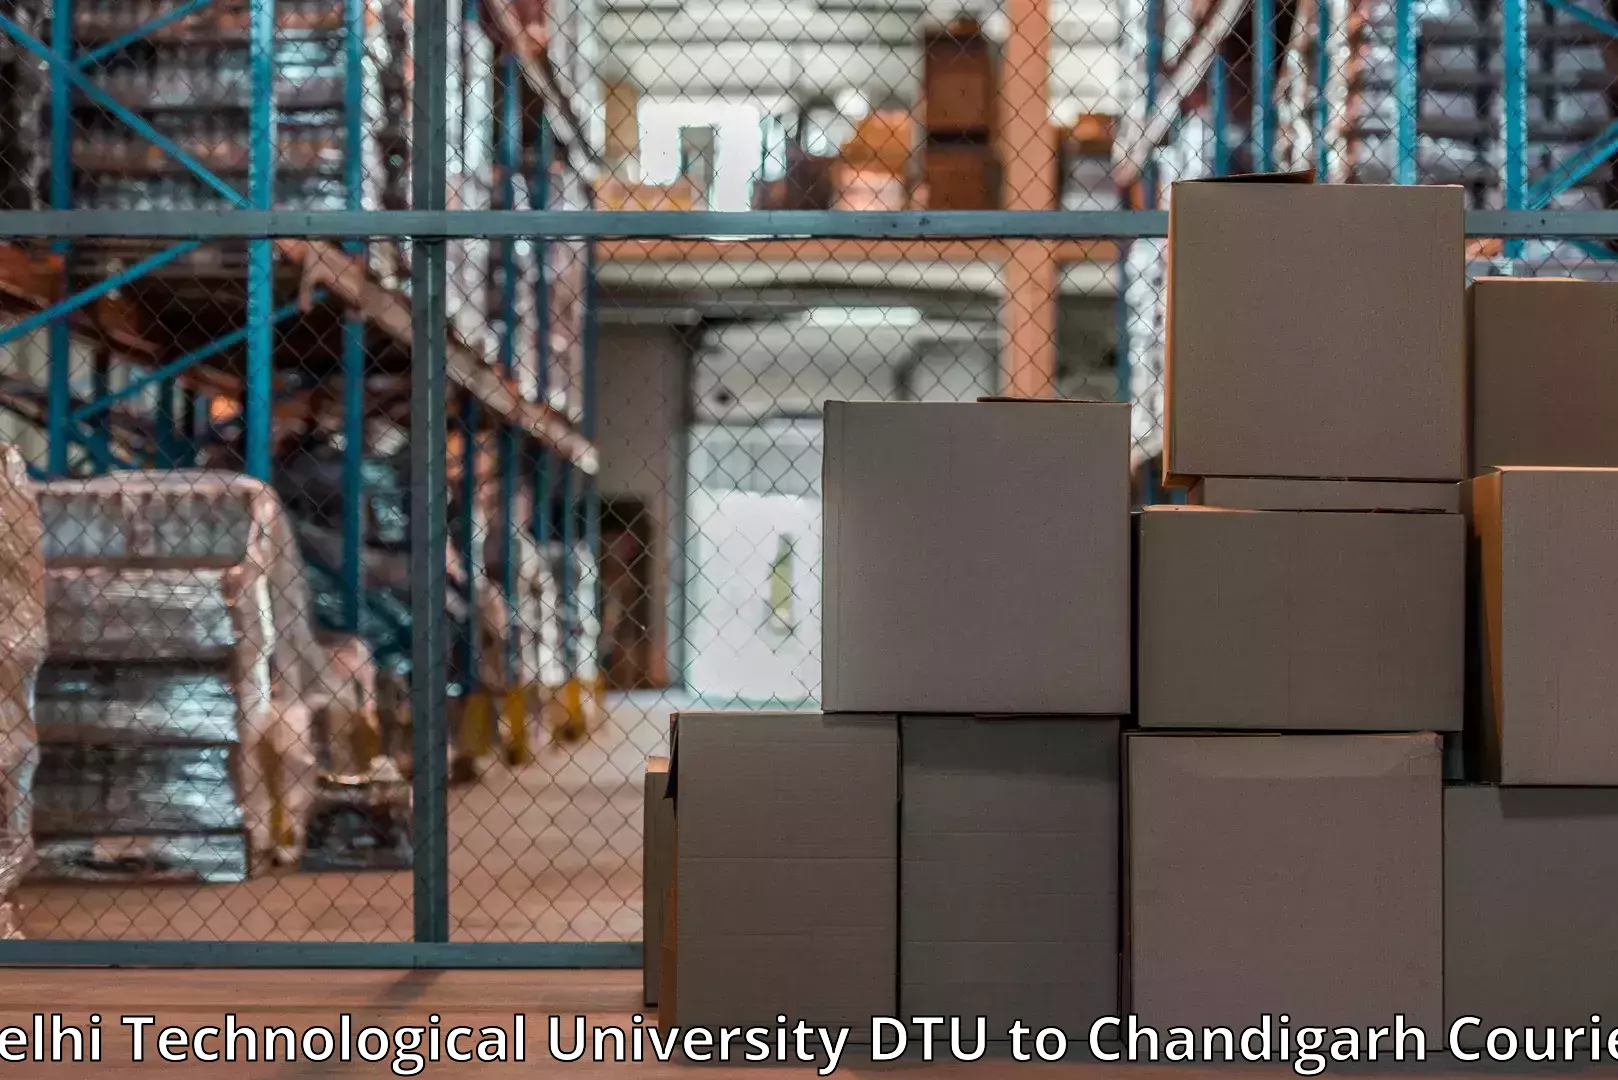 High-quality moving services Delhi Technological University DTU to Chandigarh